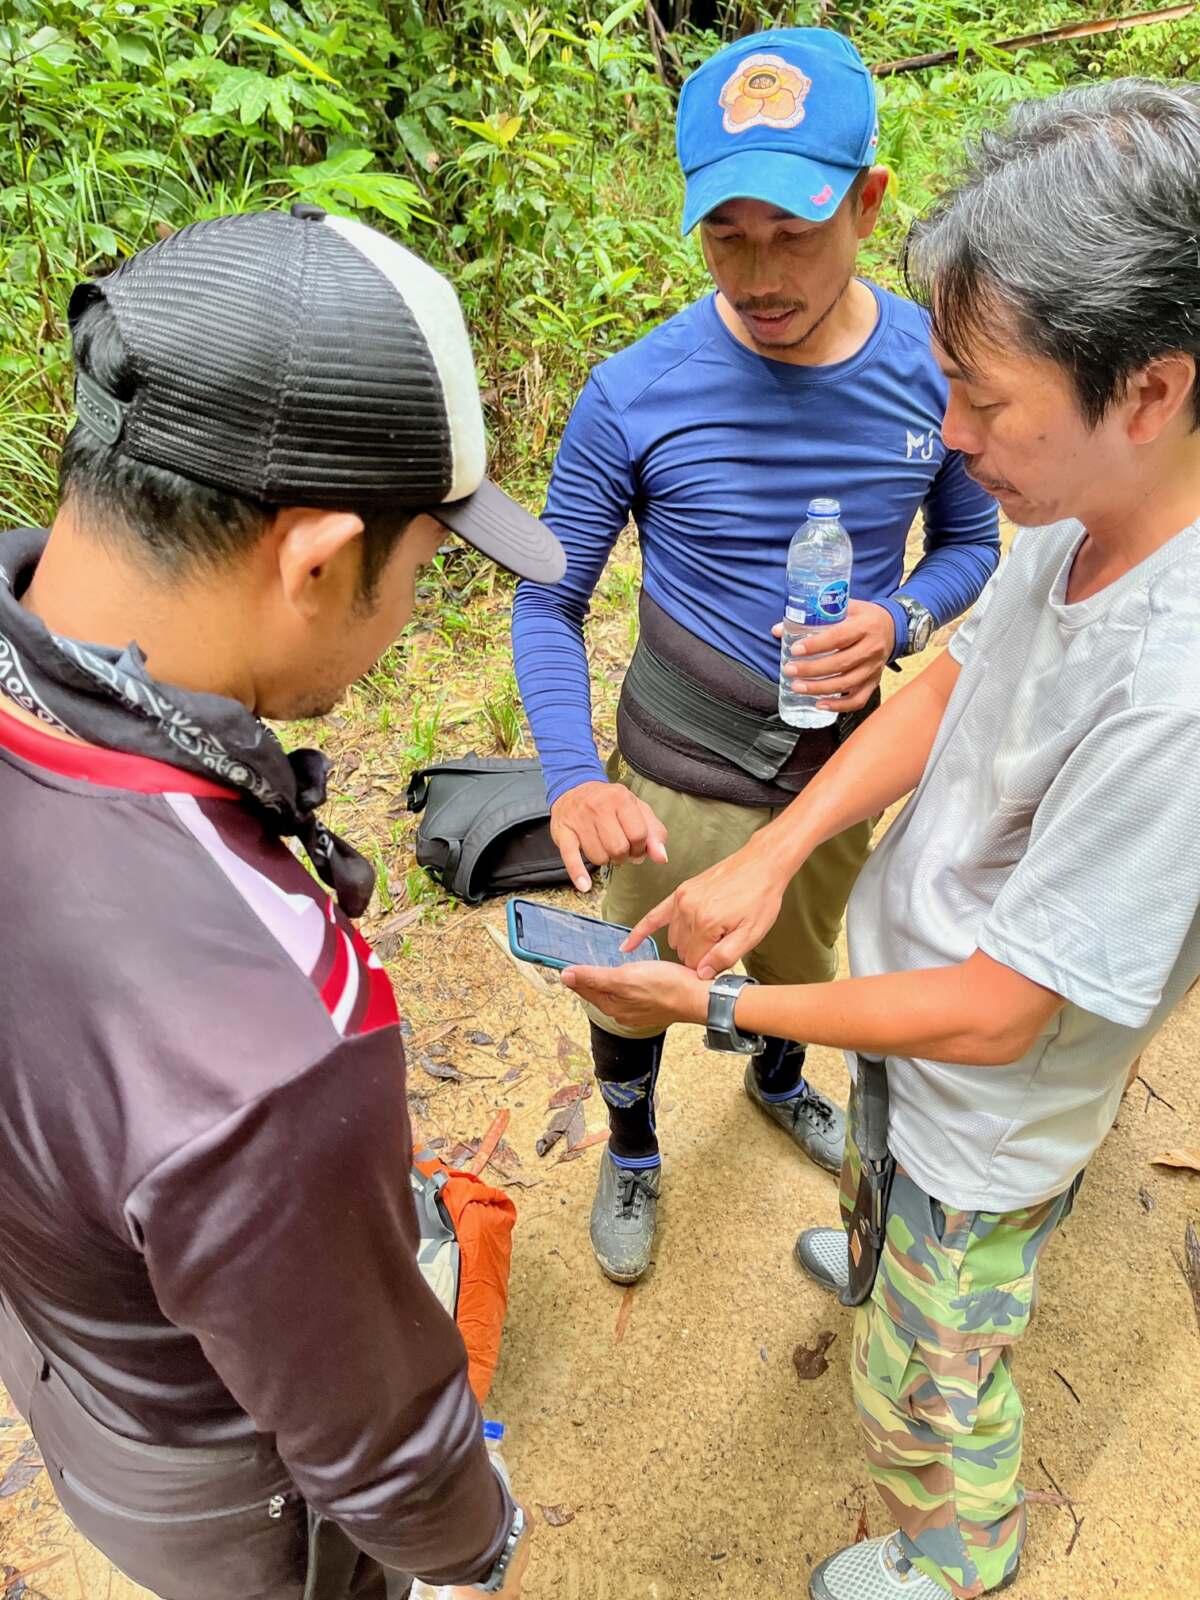 3 local guides check directions on their phone